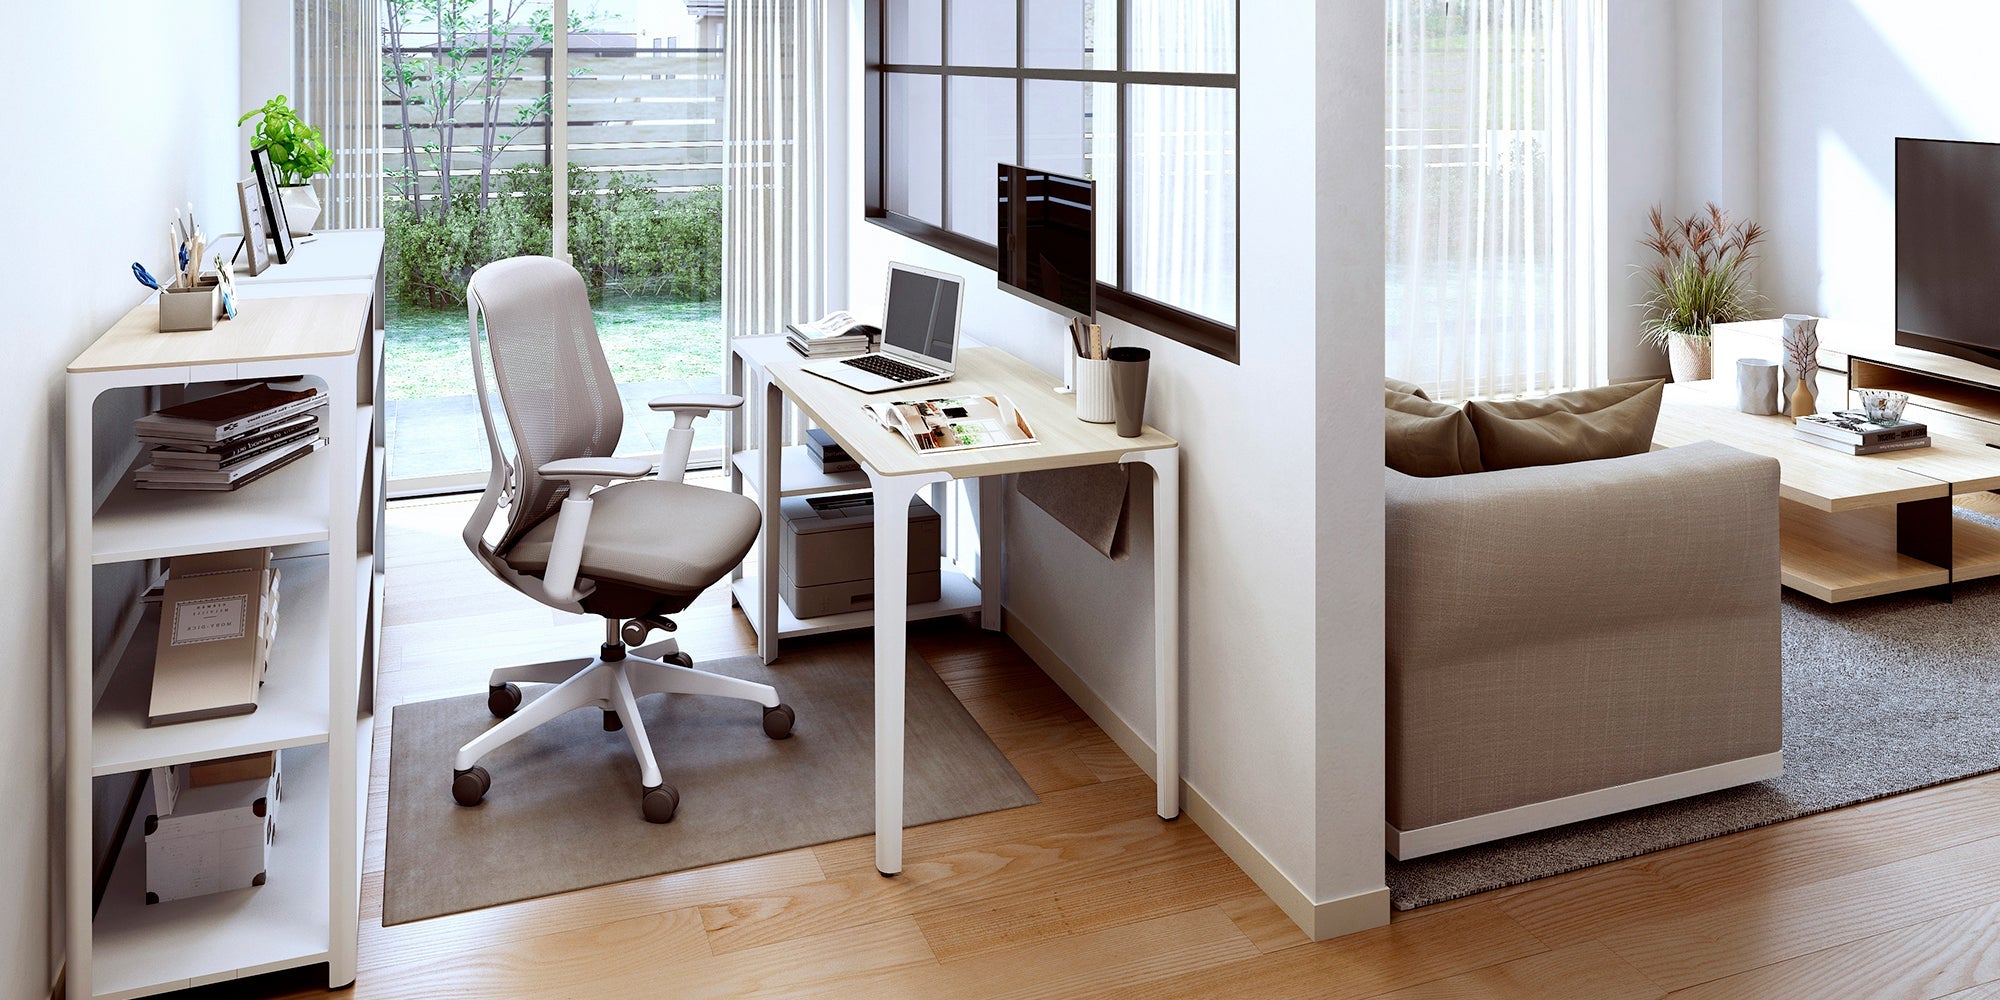 Ergonomic office chairs can better protect the health of users